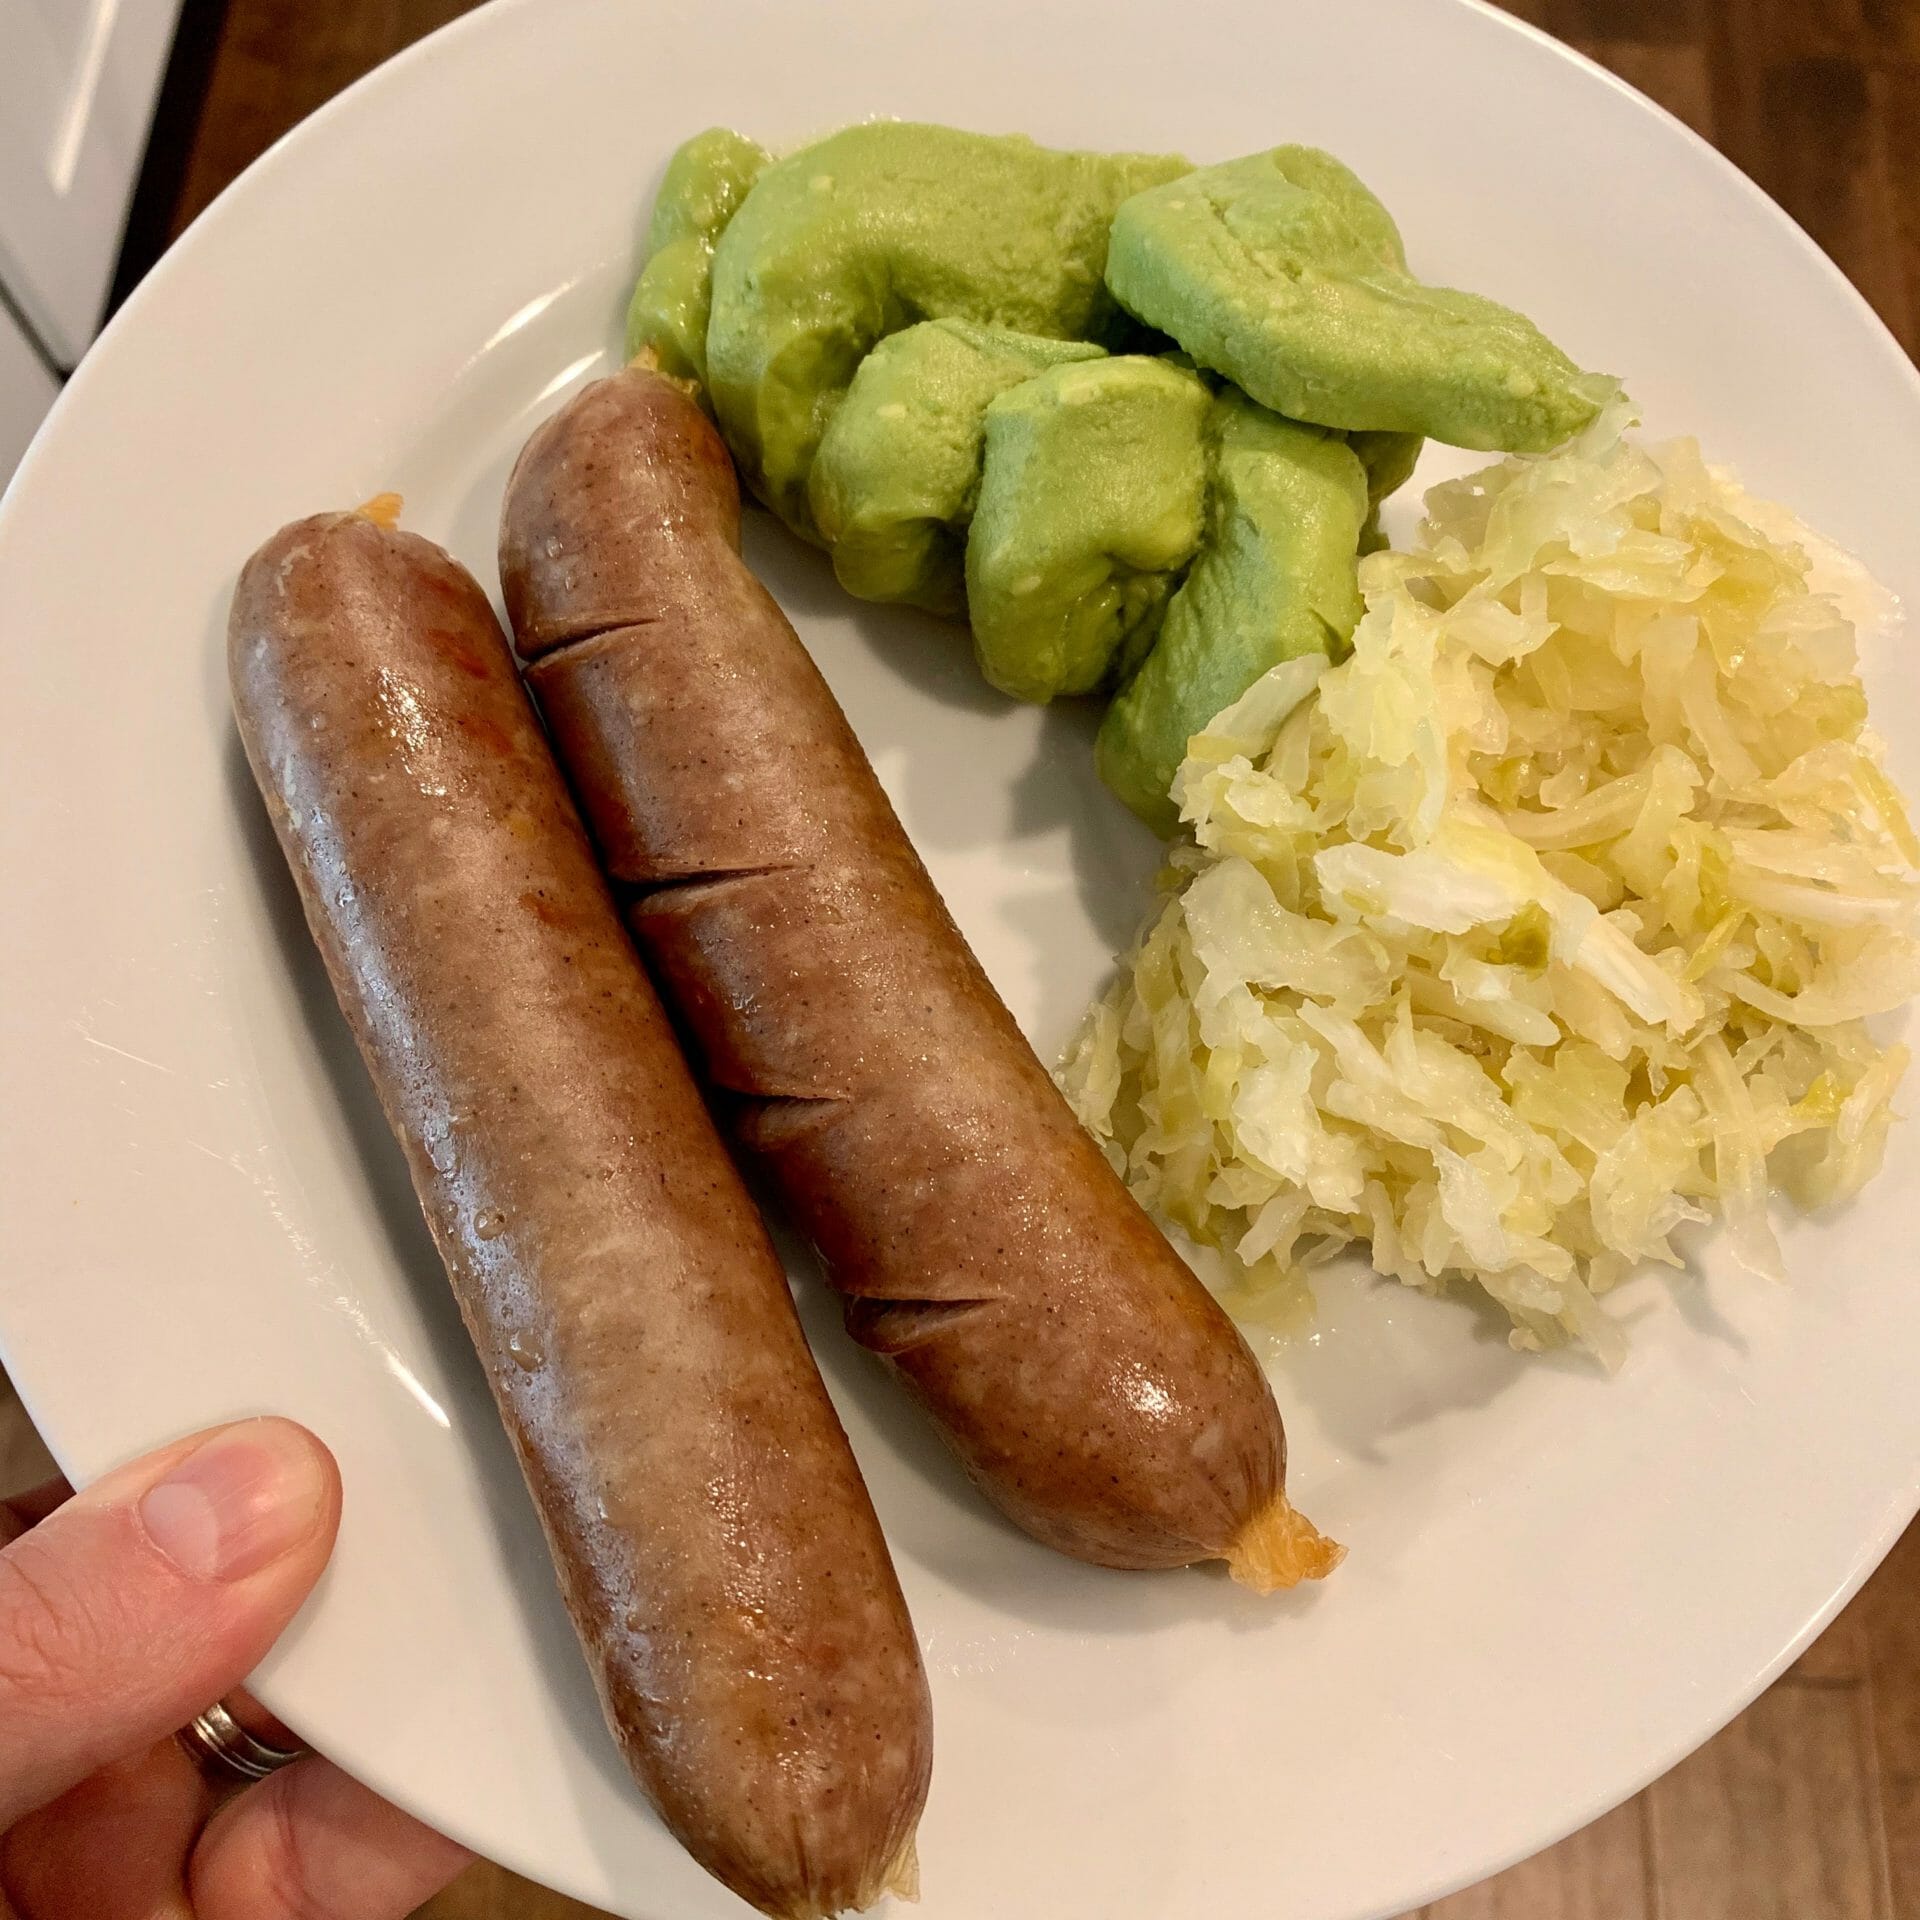 Beef sausages with sauerkraut and guacamole